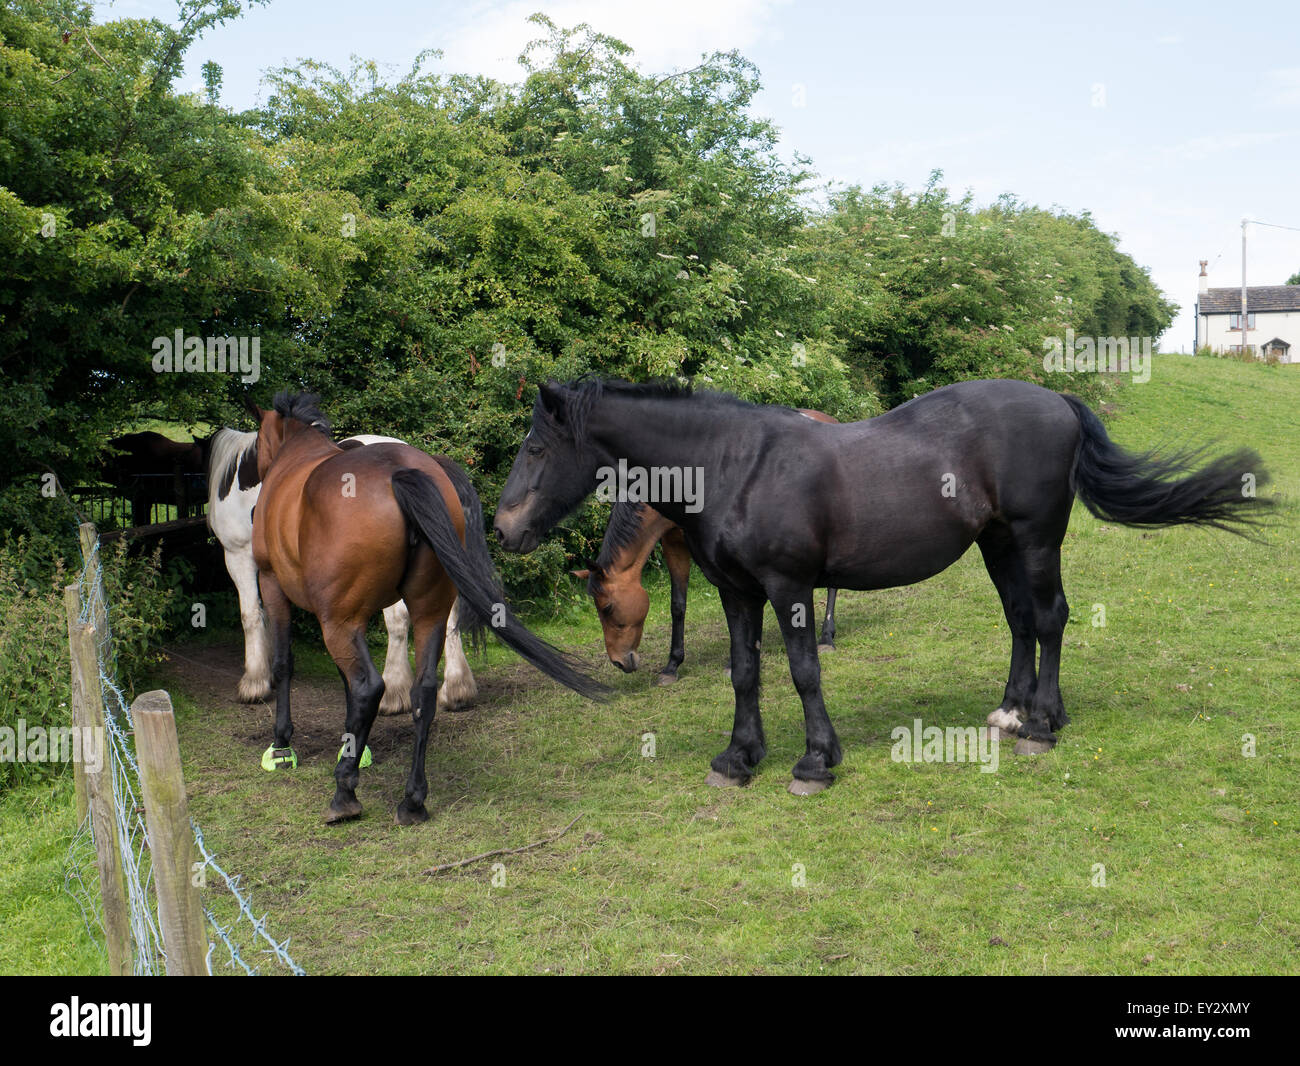 Horses in a corner of a field Stock Photo